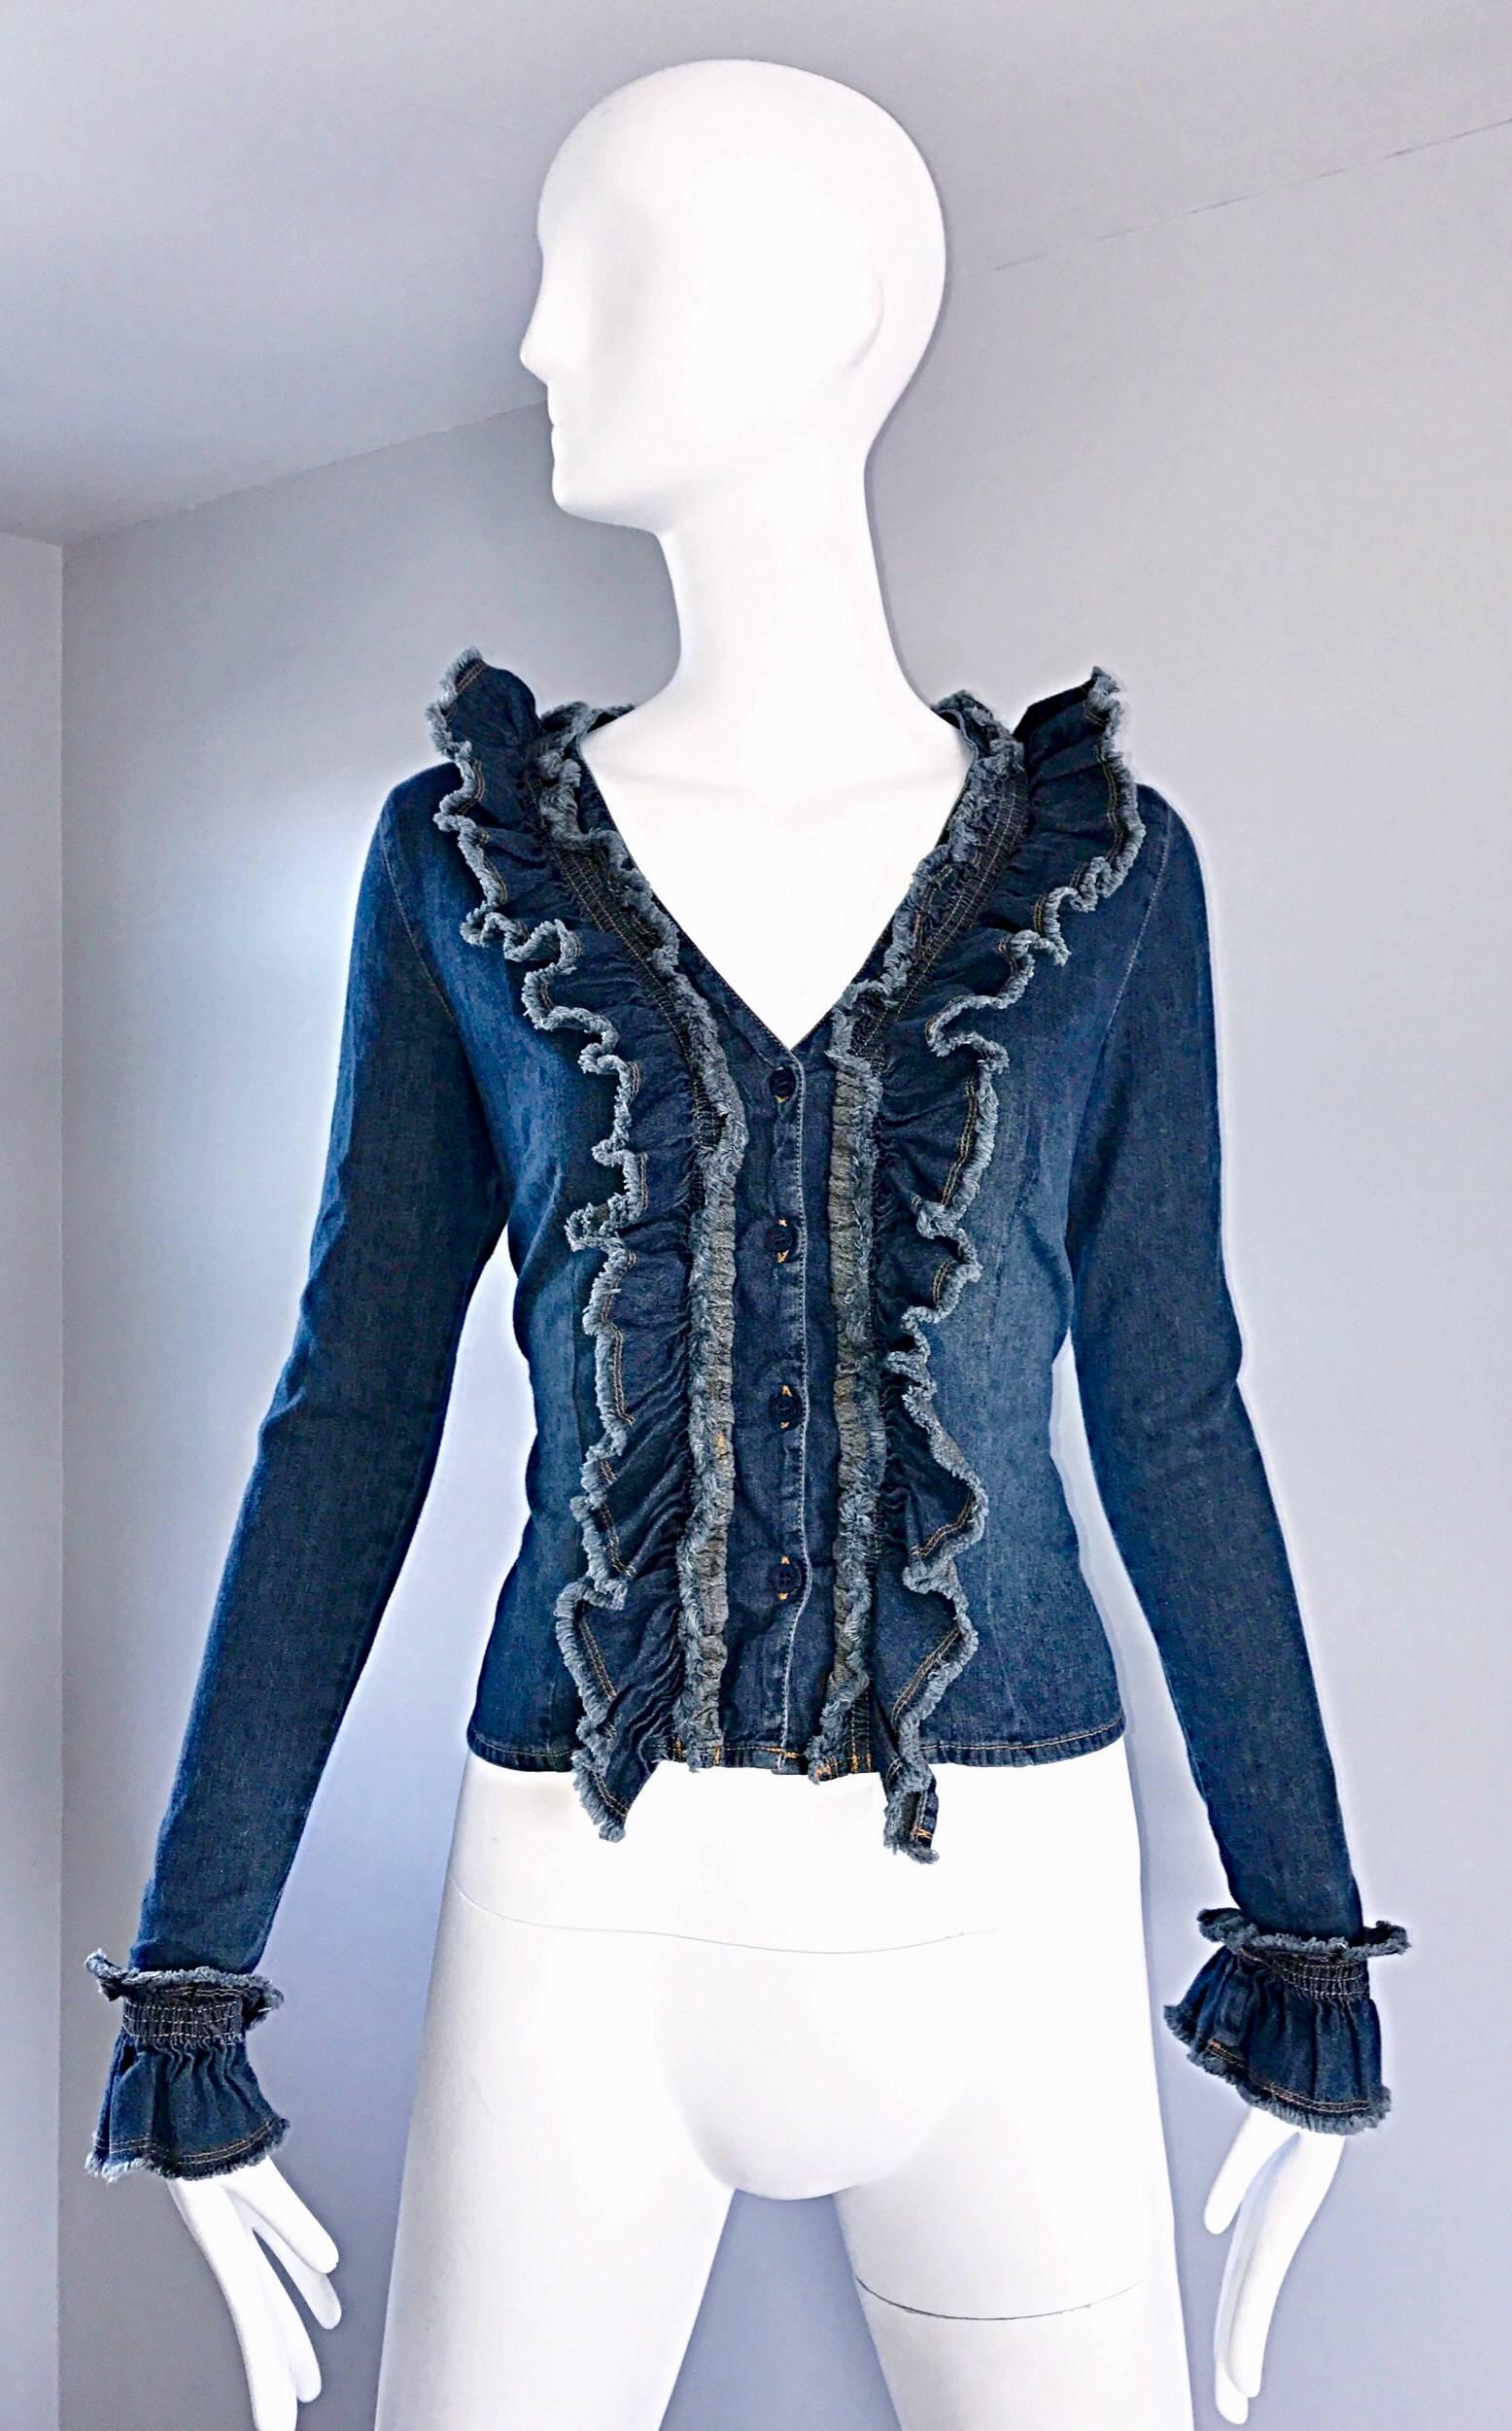 Fantastic vintage early 90s MOSCHINO denim shirt jacket! Wonderful fitted bodice buttons up the front. Dramatic ruffled collar that leads down both sides of the front bodice. Ruffle sleeve cuffs mirror the collar. Perfect soft lightweight cotton